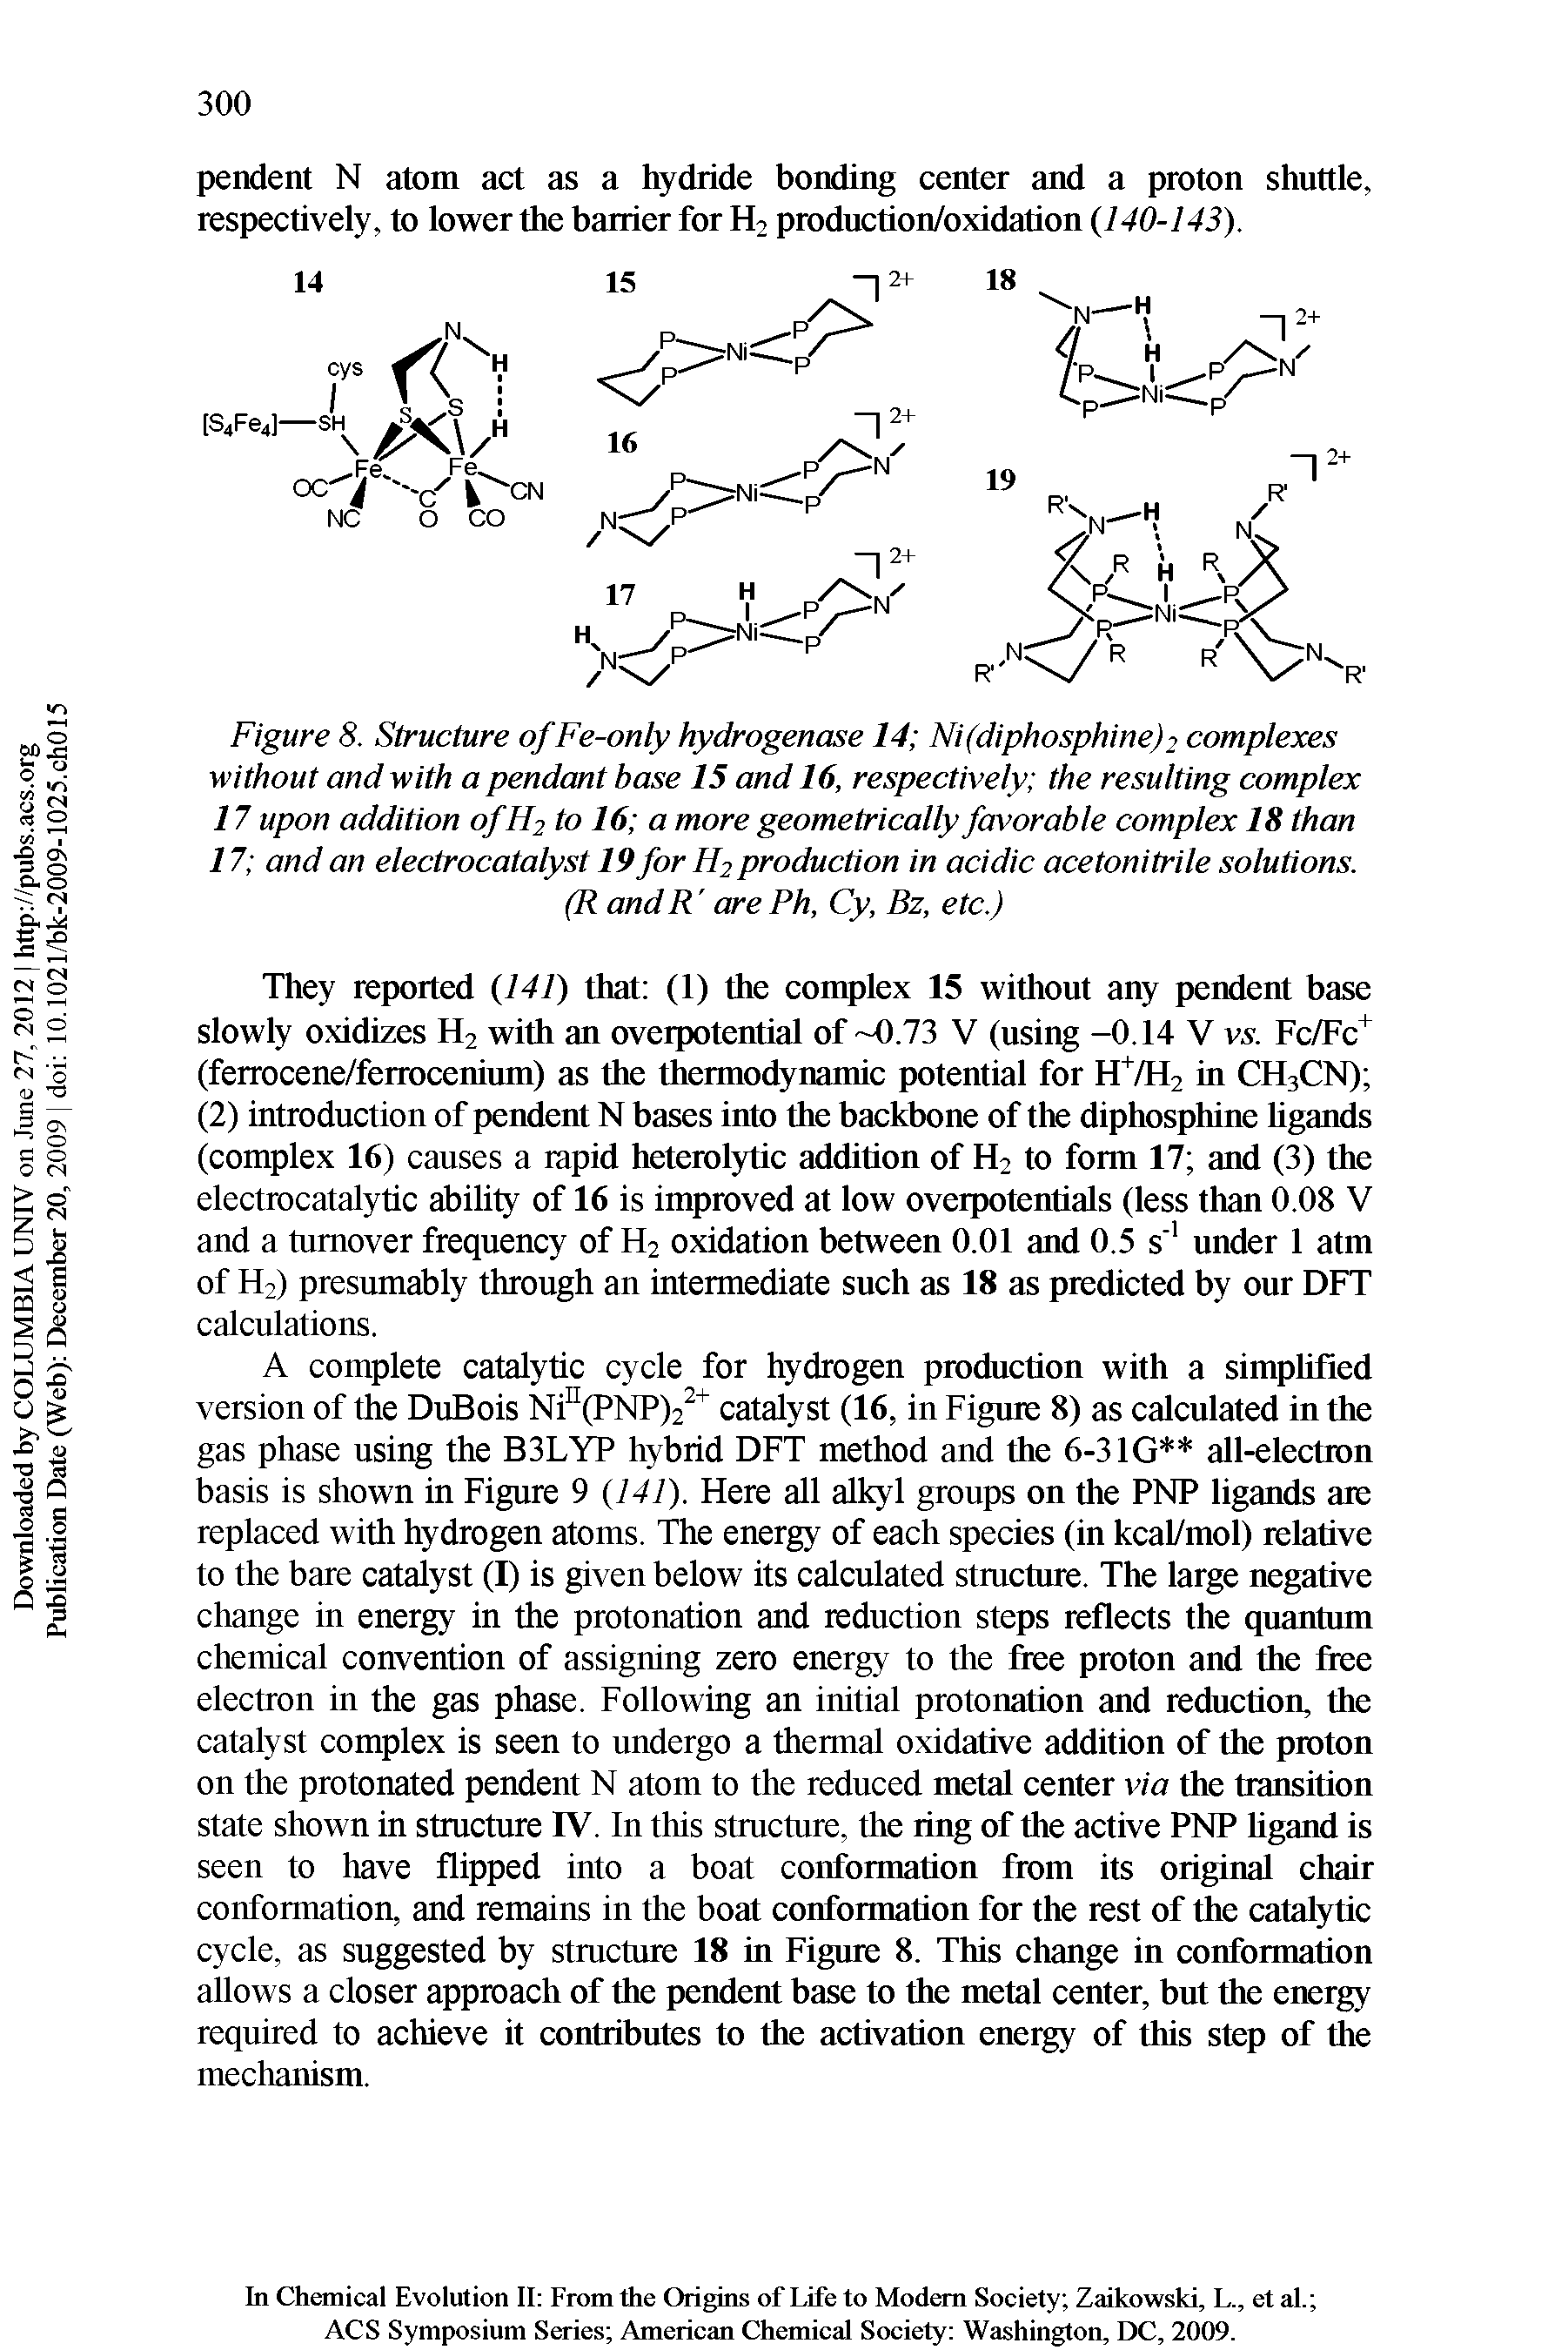 Figure 8. SFucture ofFe-only hydrogenase 14 Ni (diphosphine) 2 complexes without and with a pendant base 15 and 16, respectively the resulting complex 17 upon addition ofH2 to 16 a more geomeMcally favorable complex 18 than 17 and an electrocatalyst 19 for H2 production in acidic acetonitrile solutions.